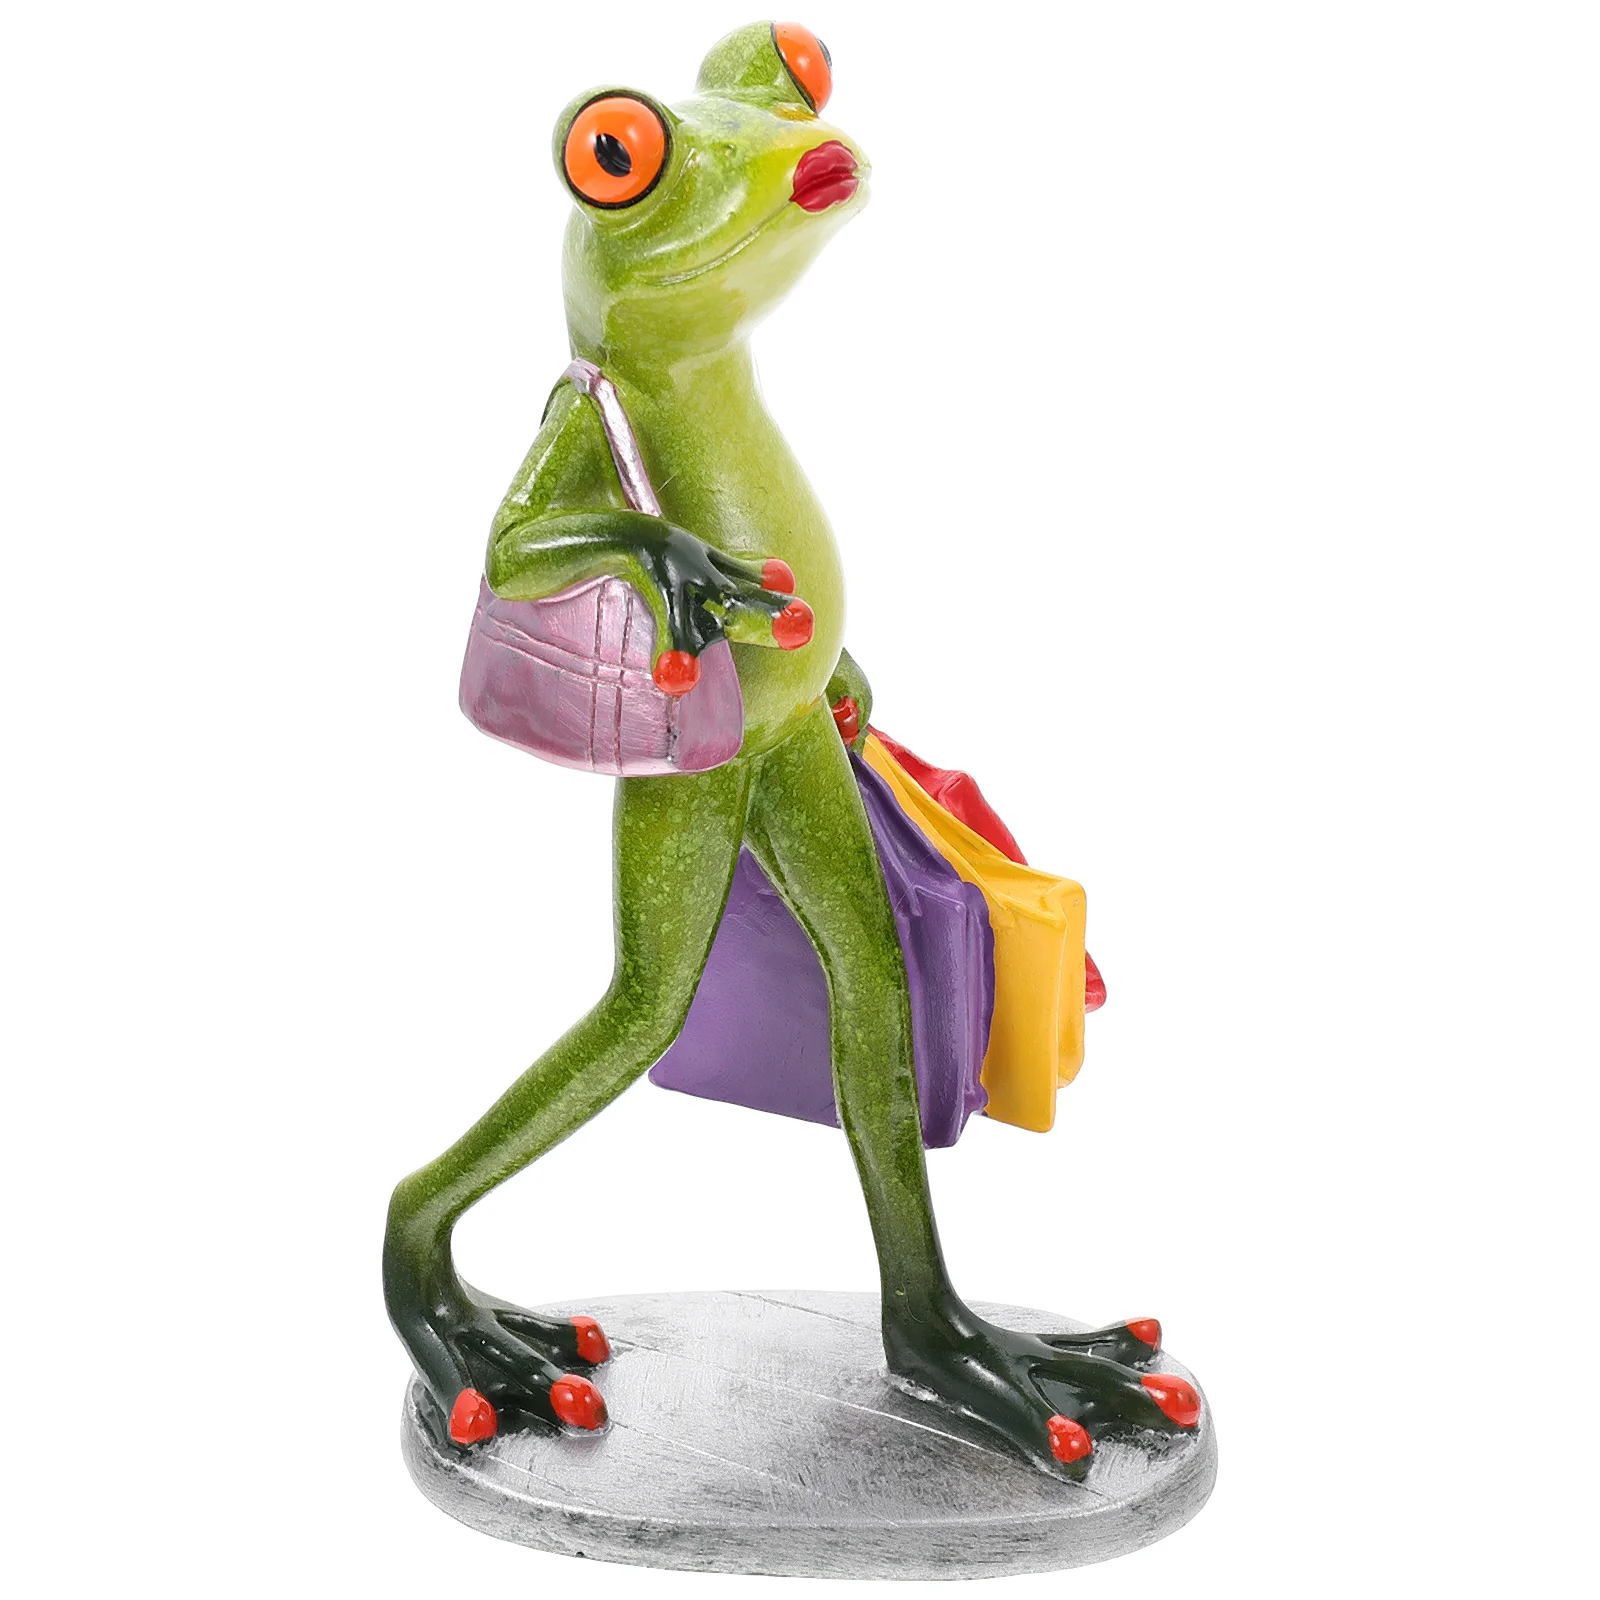 

Frog Statue Animal Garden Figurine Resin Figurines Outdoor Ornament Frogs Sculptures Funny Lawn Realistic